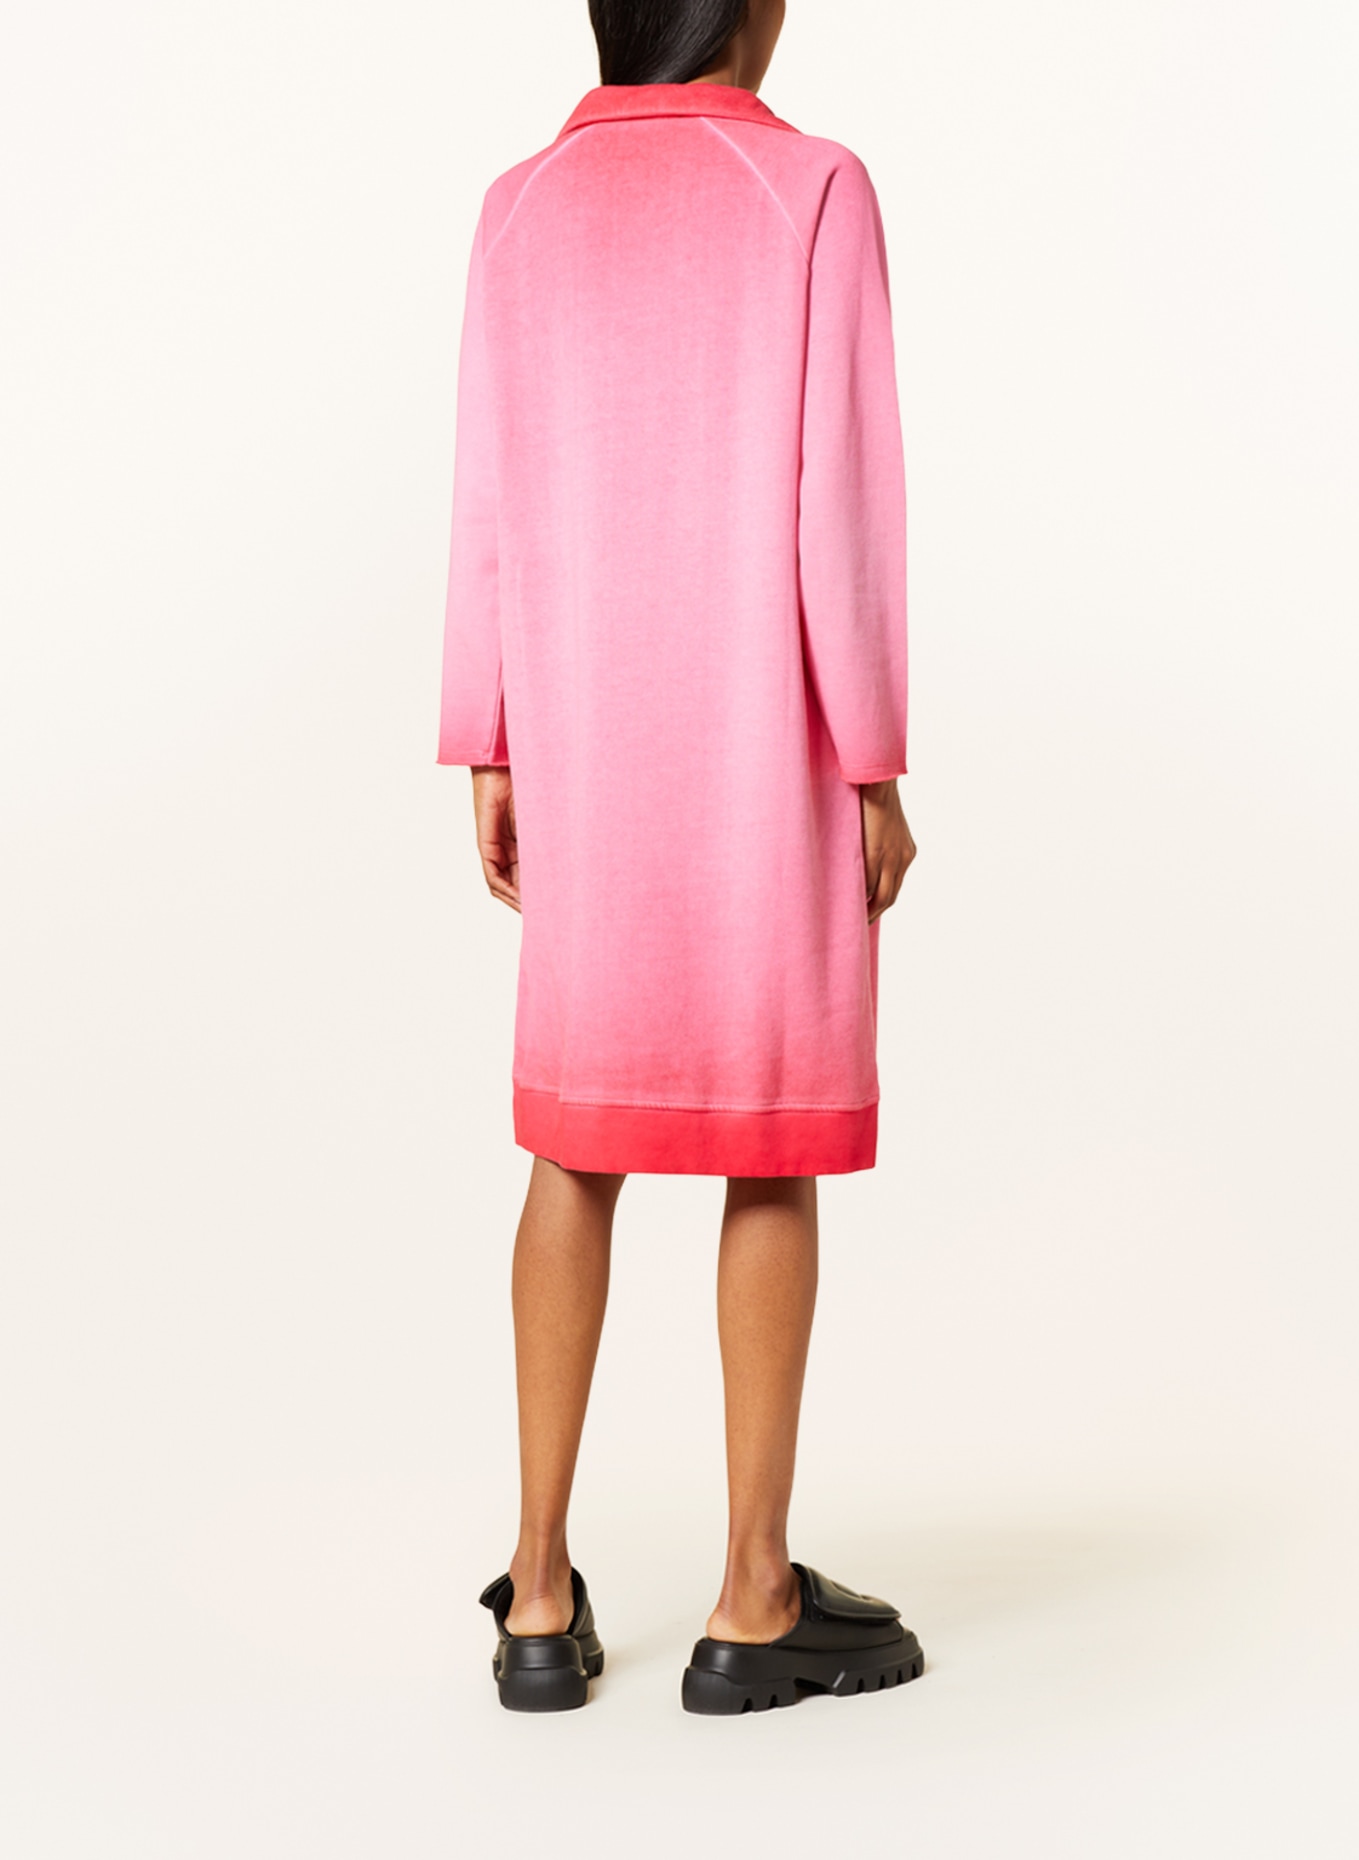 yippie hippie Oversized sweater dress, Color: PINK (Image 3)